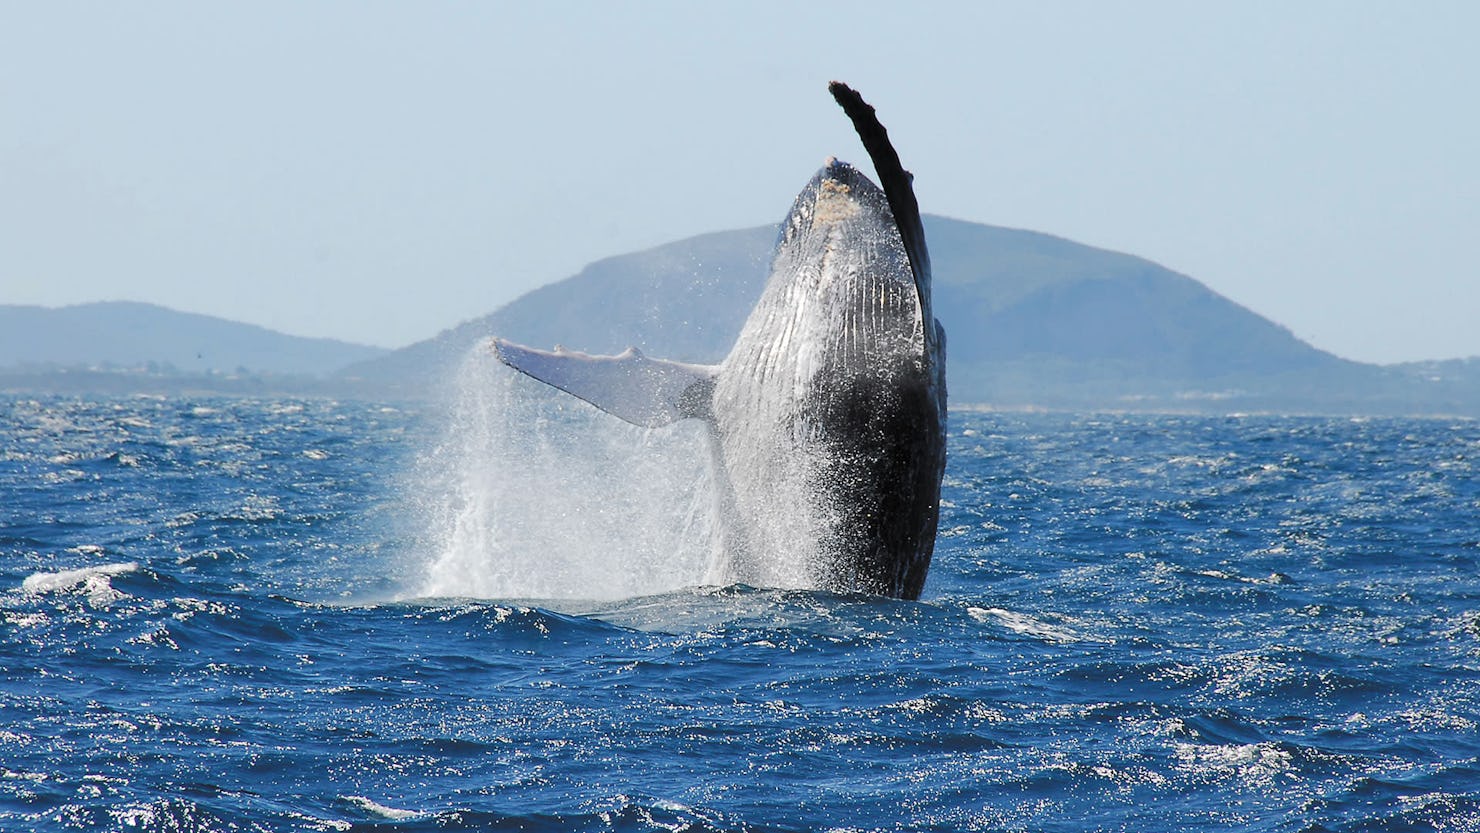 Whale breaching in front of Mount Coolum with Sunreef Mooloolaba